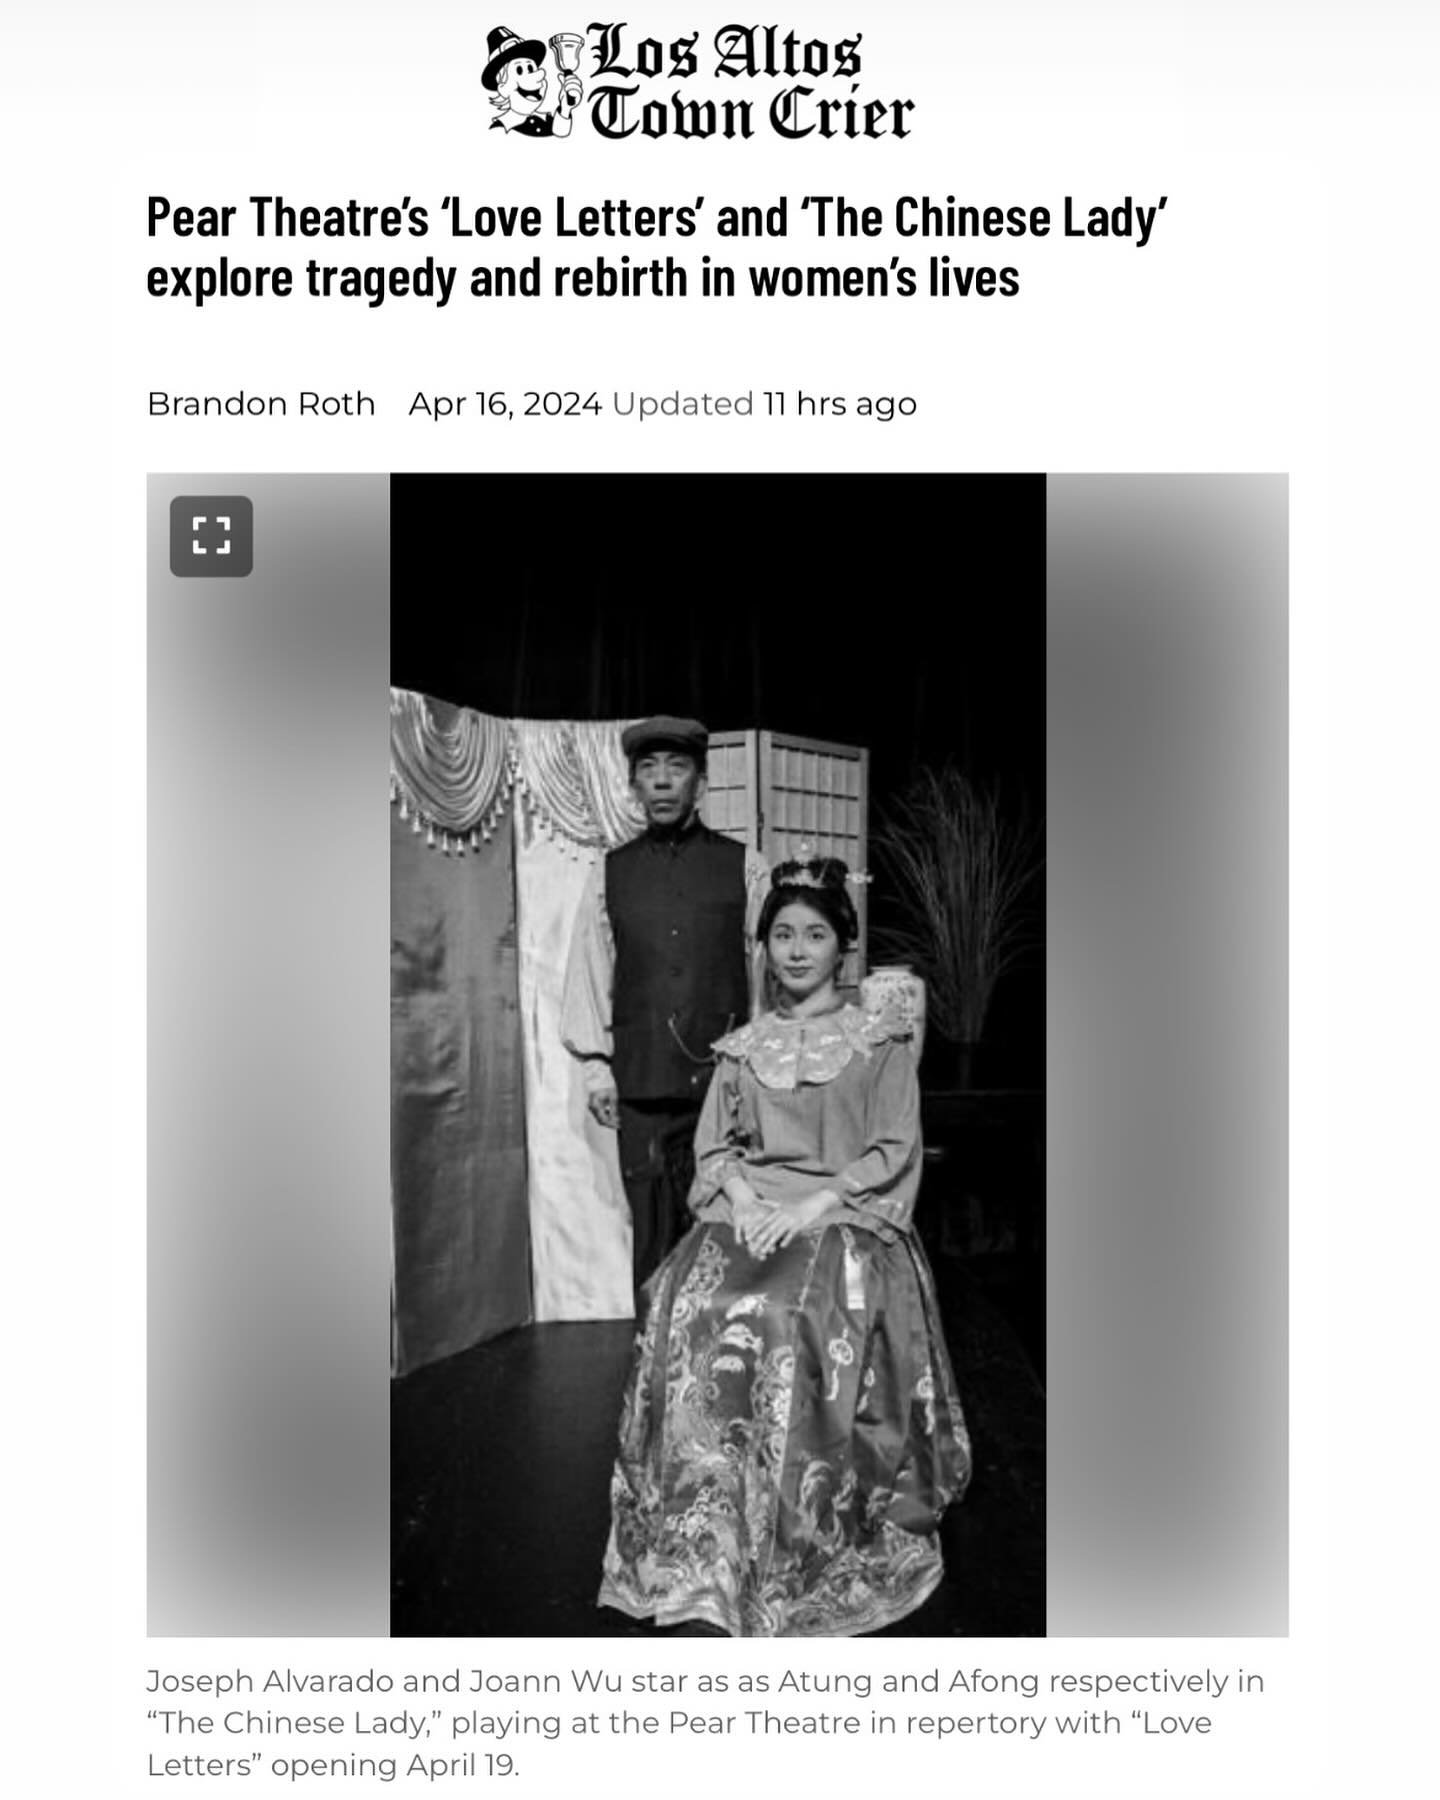 ICYMI, director Wynne Chan and actors Joseph Alvarado and Joann Wu were recently interviewed and featured in a @losaltostowncrier article on both shows opening in rep this weekend! 

🔗Read the full write-up at: tinyurl.com/4x33pwmu

🌸💞 &ldquo;Both